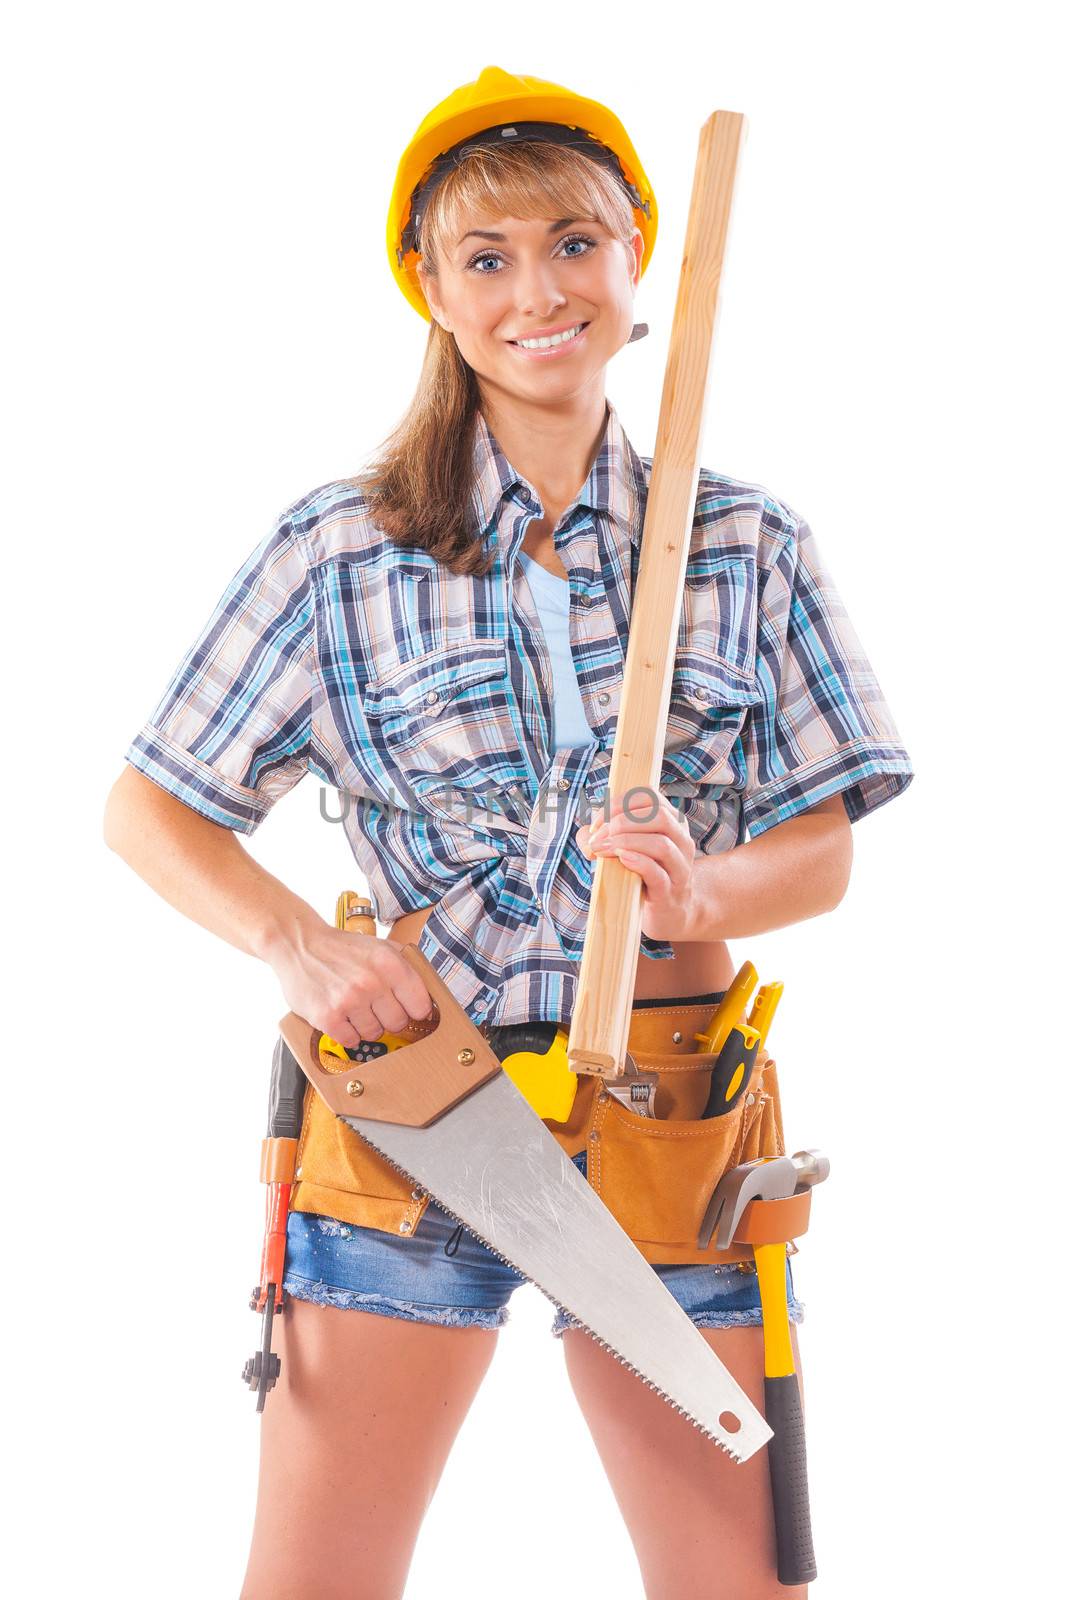 sexy female worker with carpenter tools isolated on white backgr by mihalec